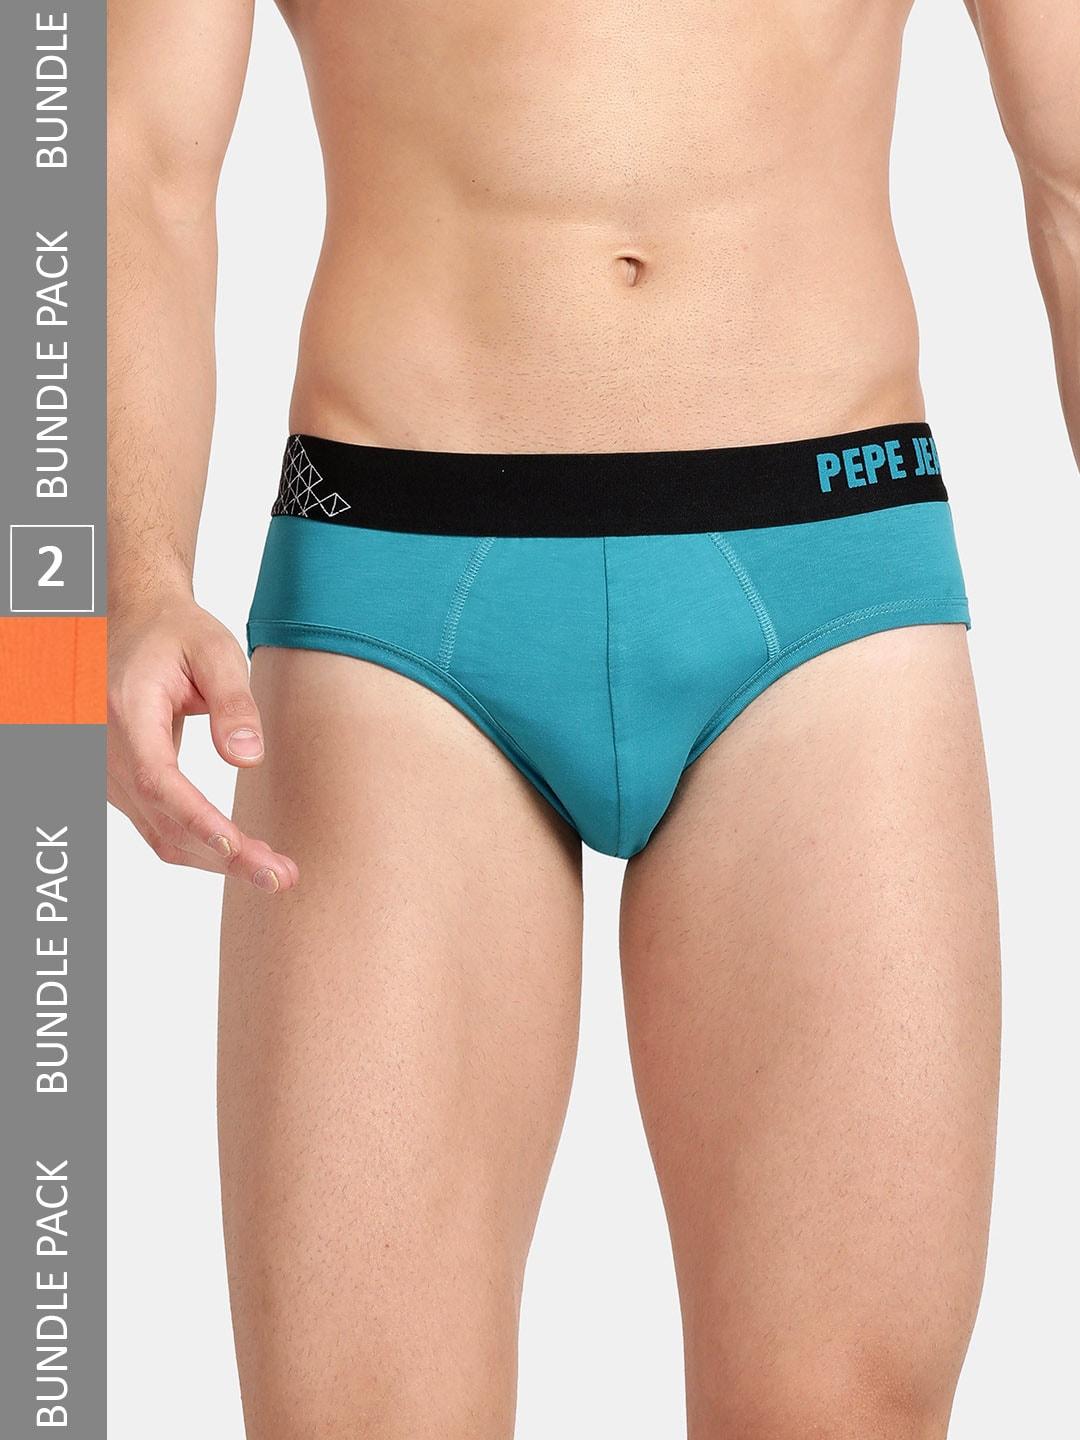 pepe-jeans-men-pack-of-2-mid-rise-cotton--basic-briefs